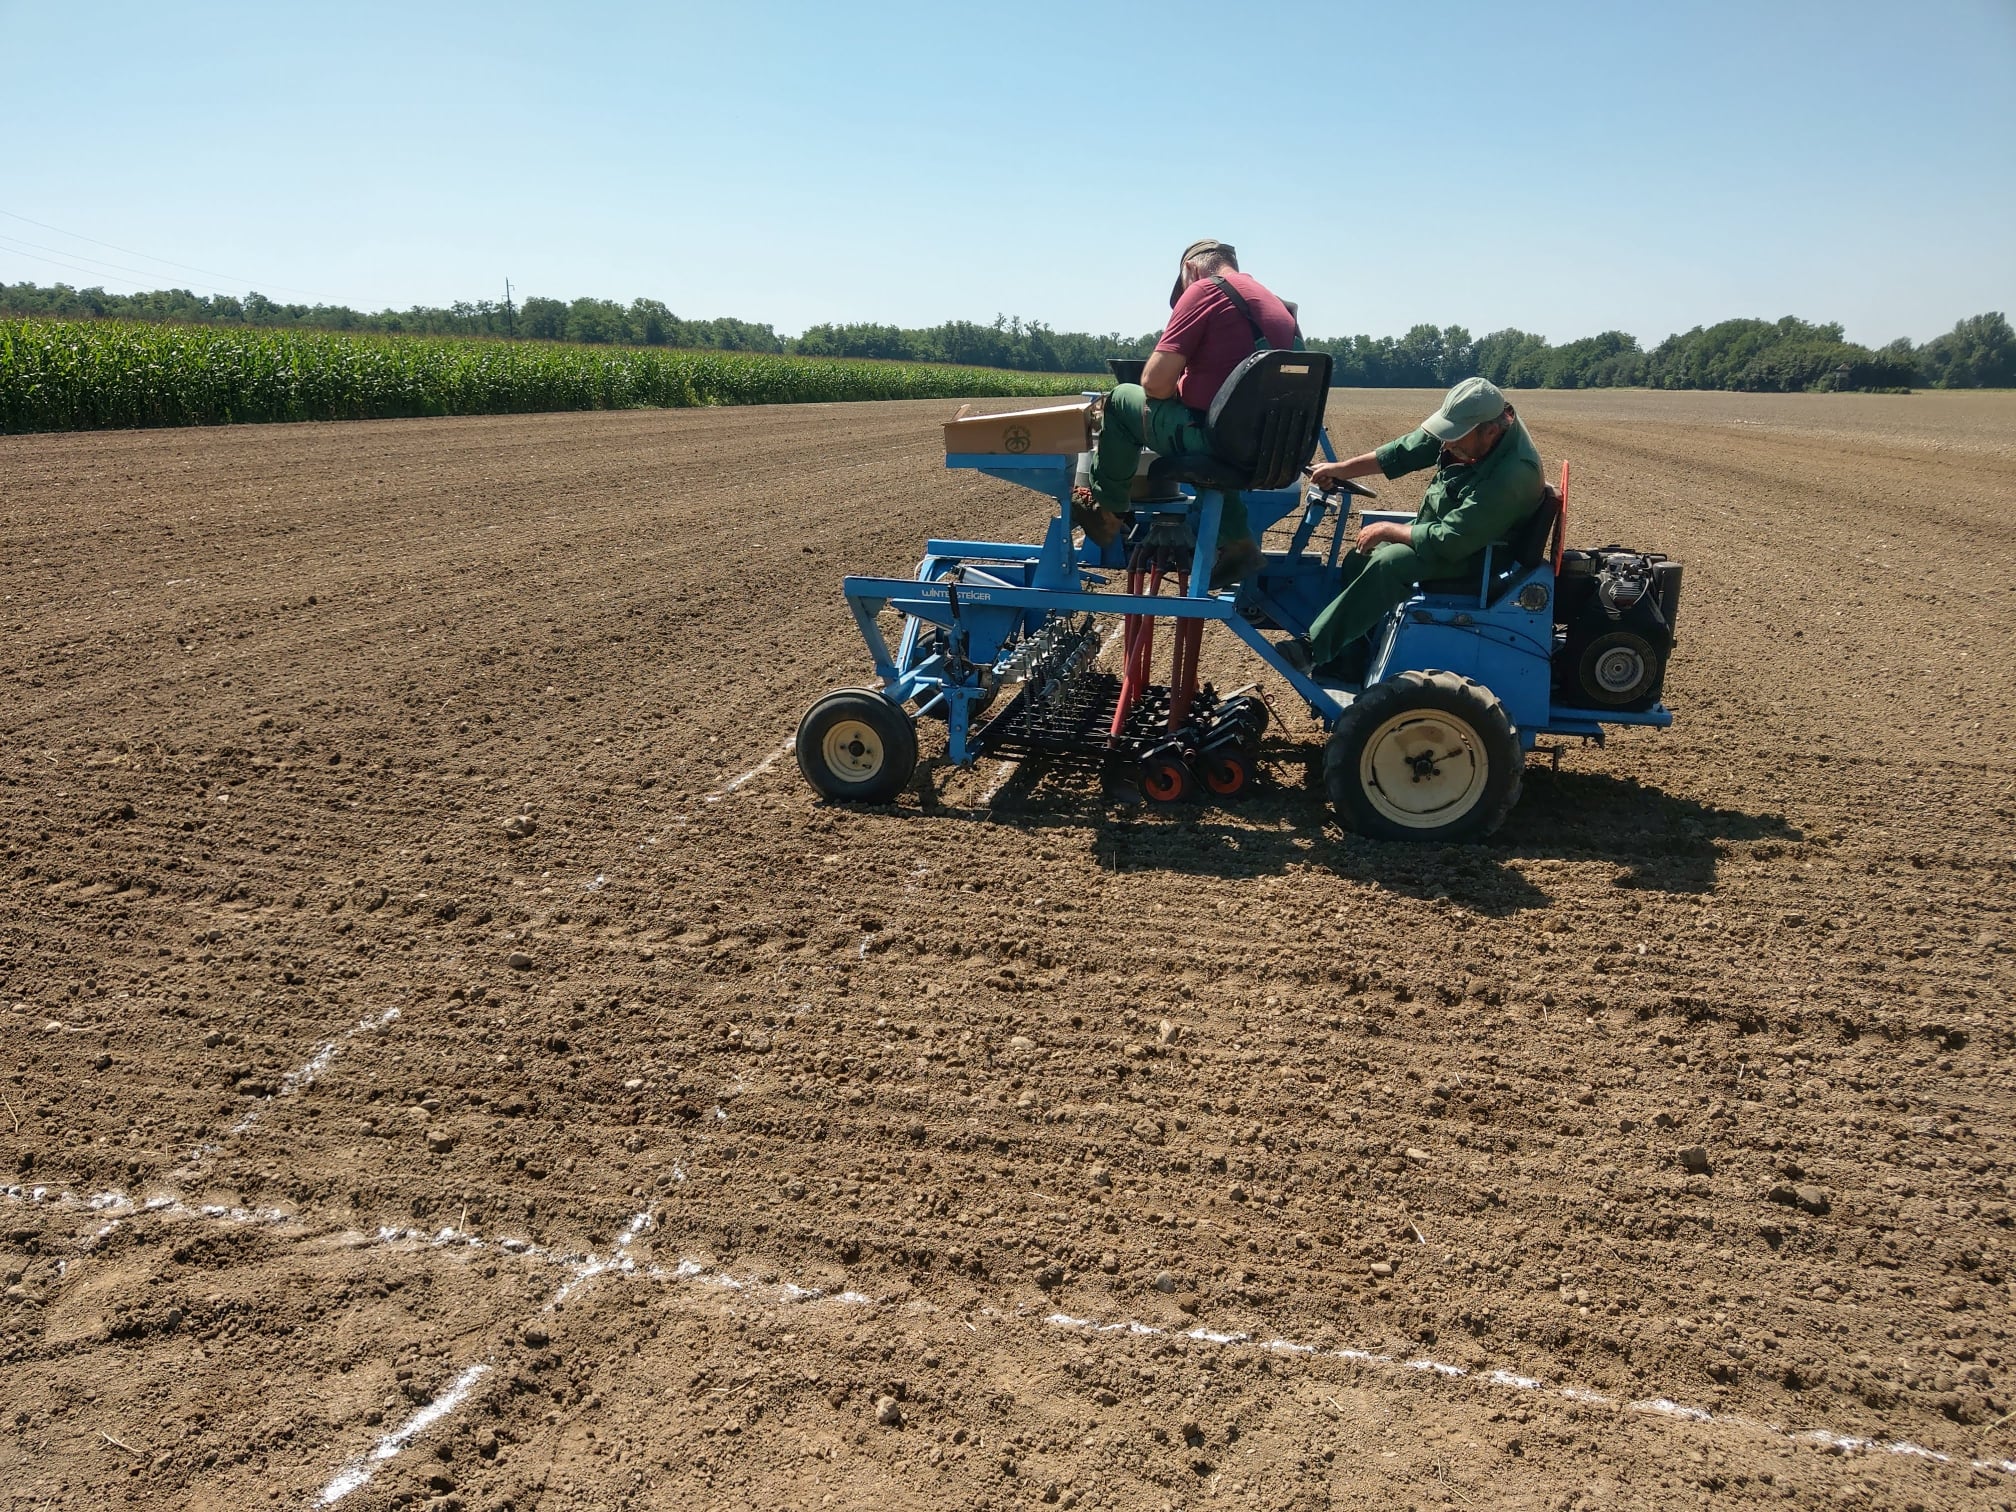 Buckwheat sowing in Slovenia